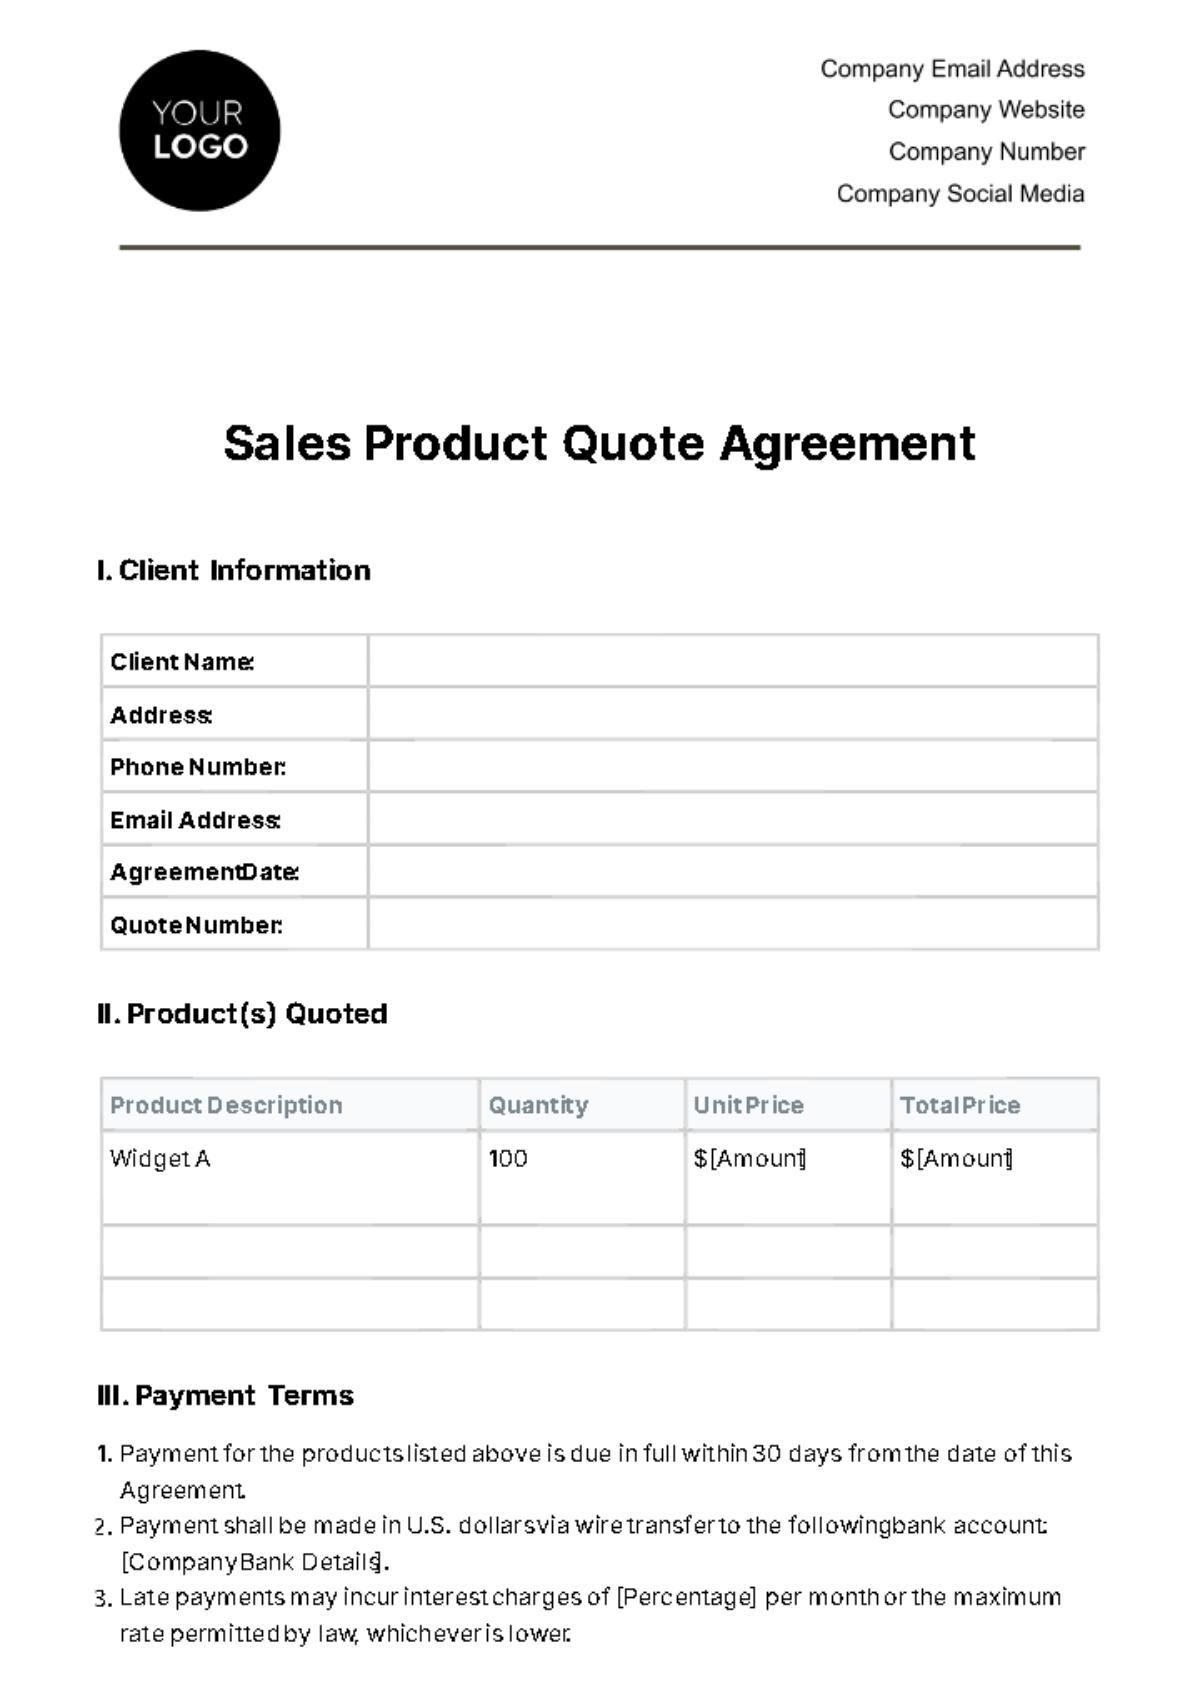 Free Sales Product Quote Agreement Template